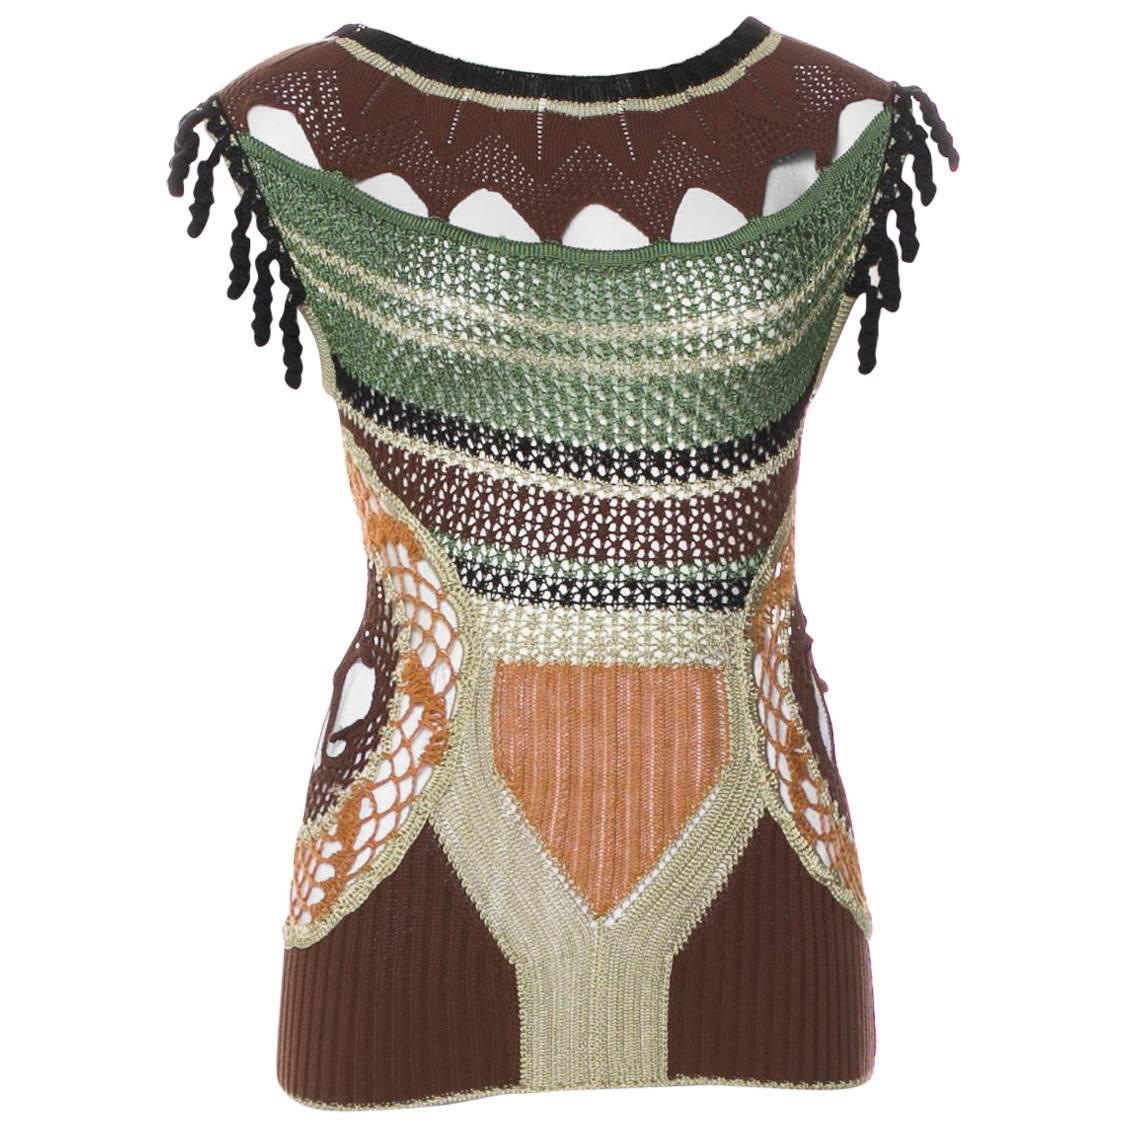 Jean Paul Gaultier Macrame Top with Tassels and JPG Dreamcatcher For Sale